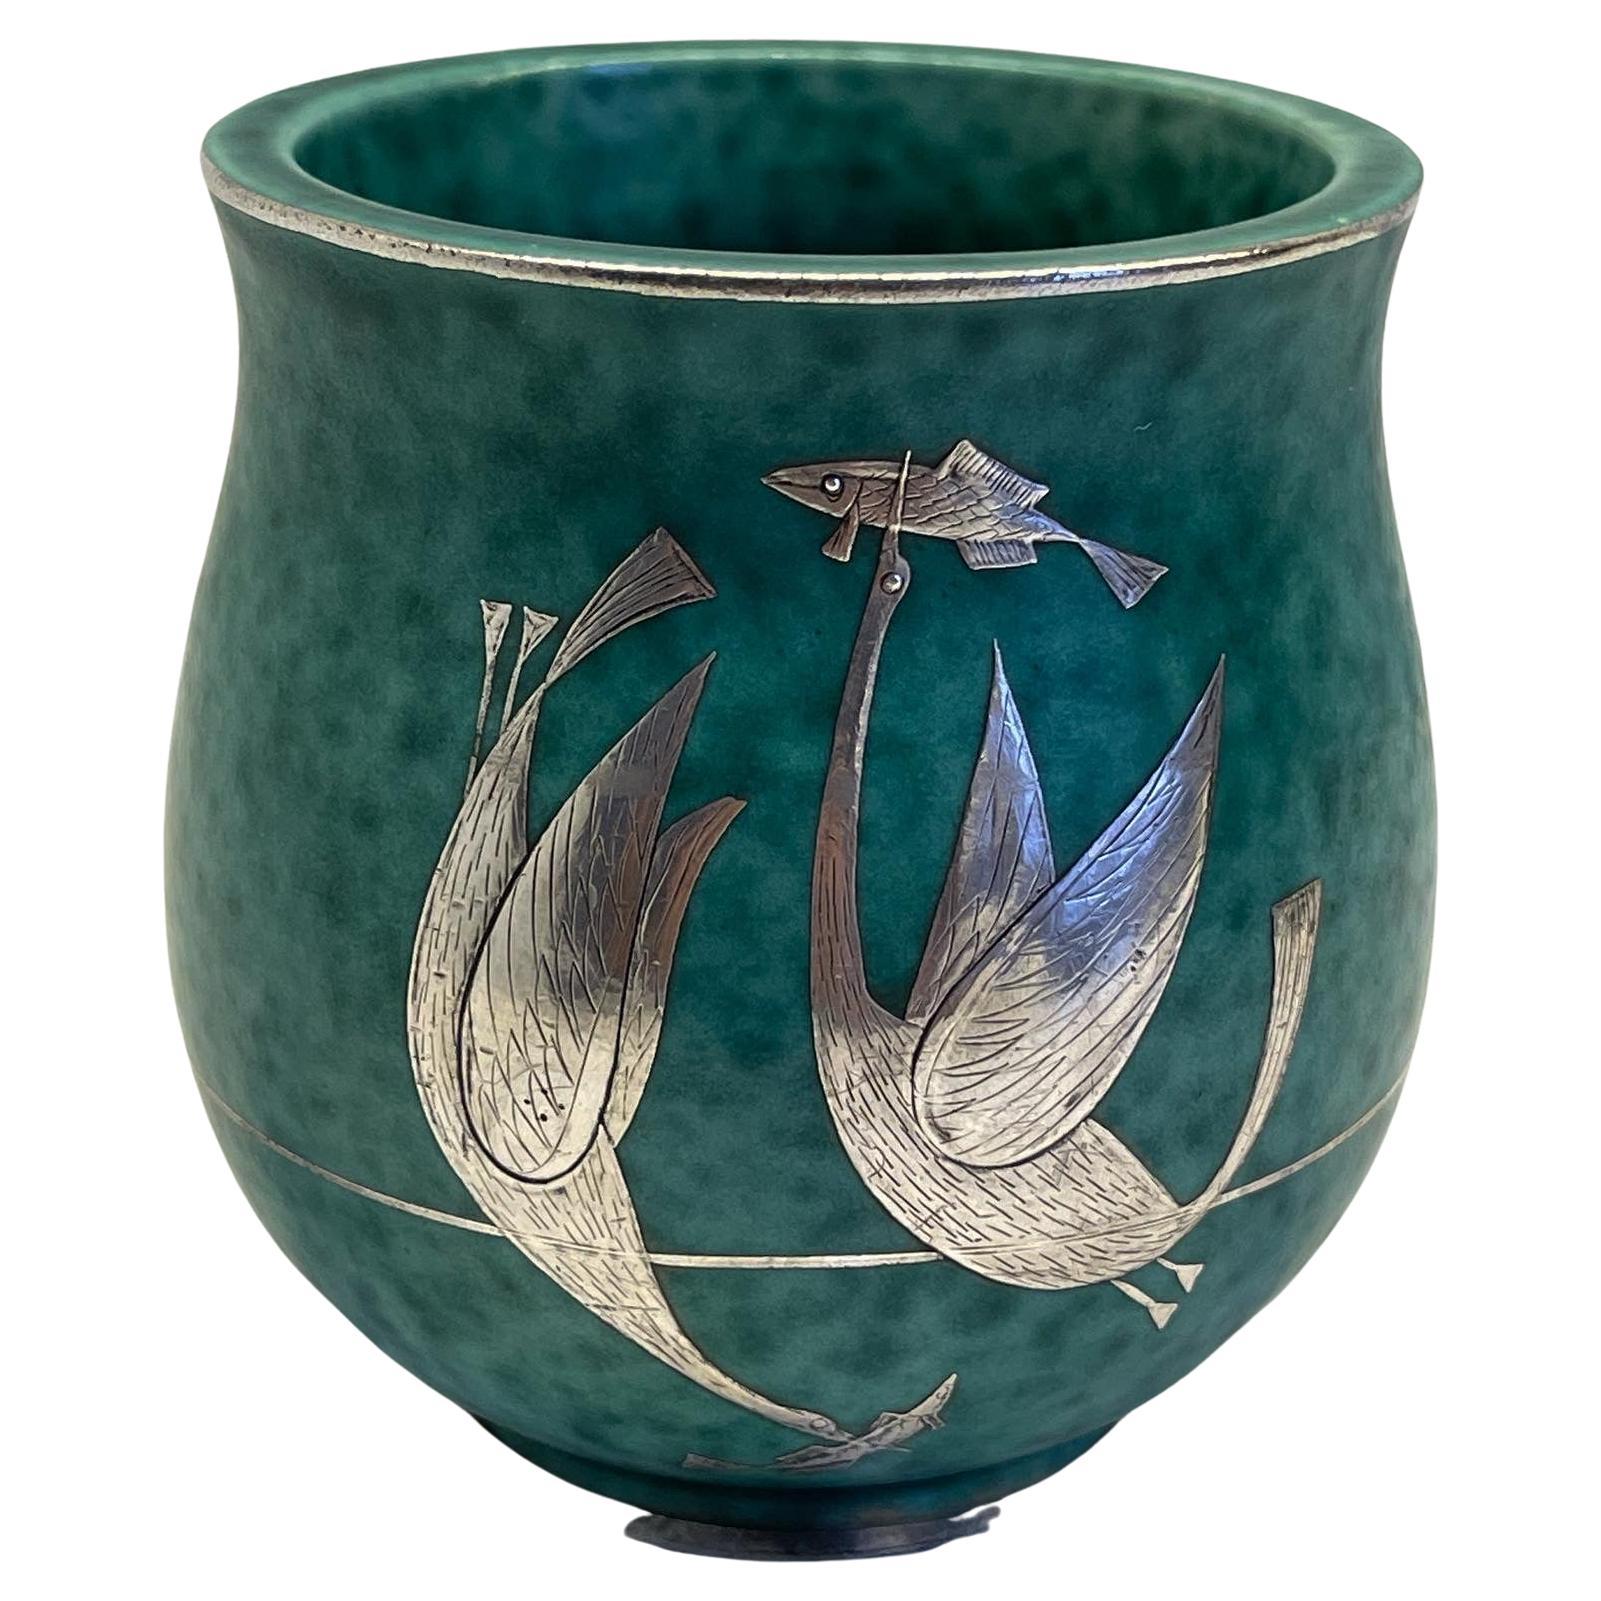 A pot in ceramic with hand made silver inlay from the 1930s Argenta collection made by Wilhelm Kåge for Gustavsberg, signature underneath.
 The now iconic argenta stoneware collection, with its green glaze and silver decoration, is one of wilhelm